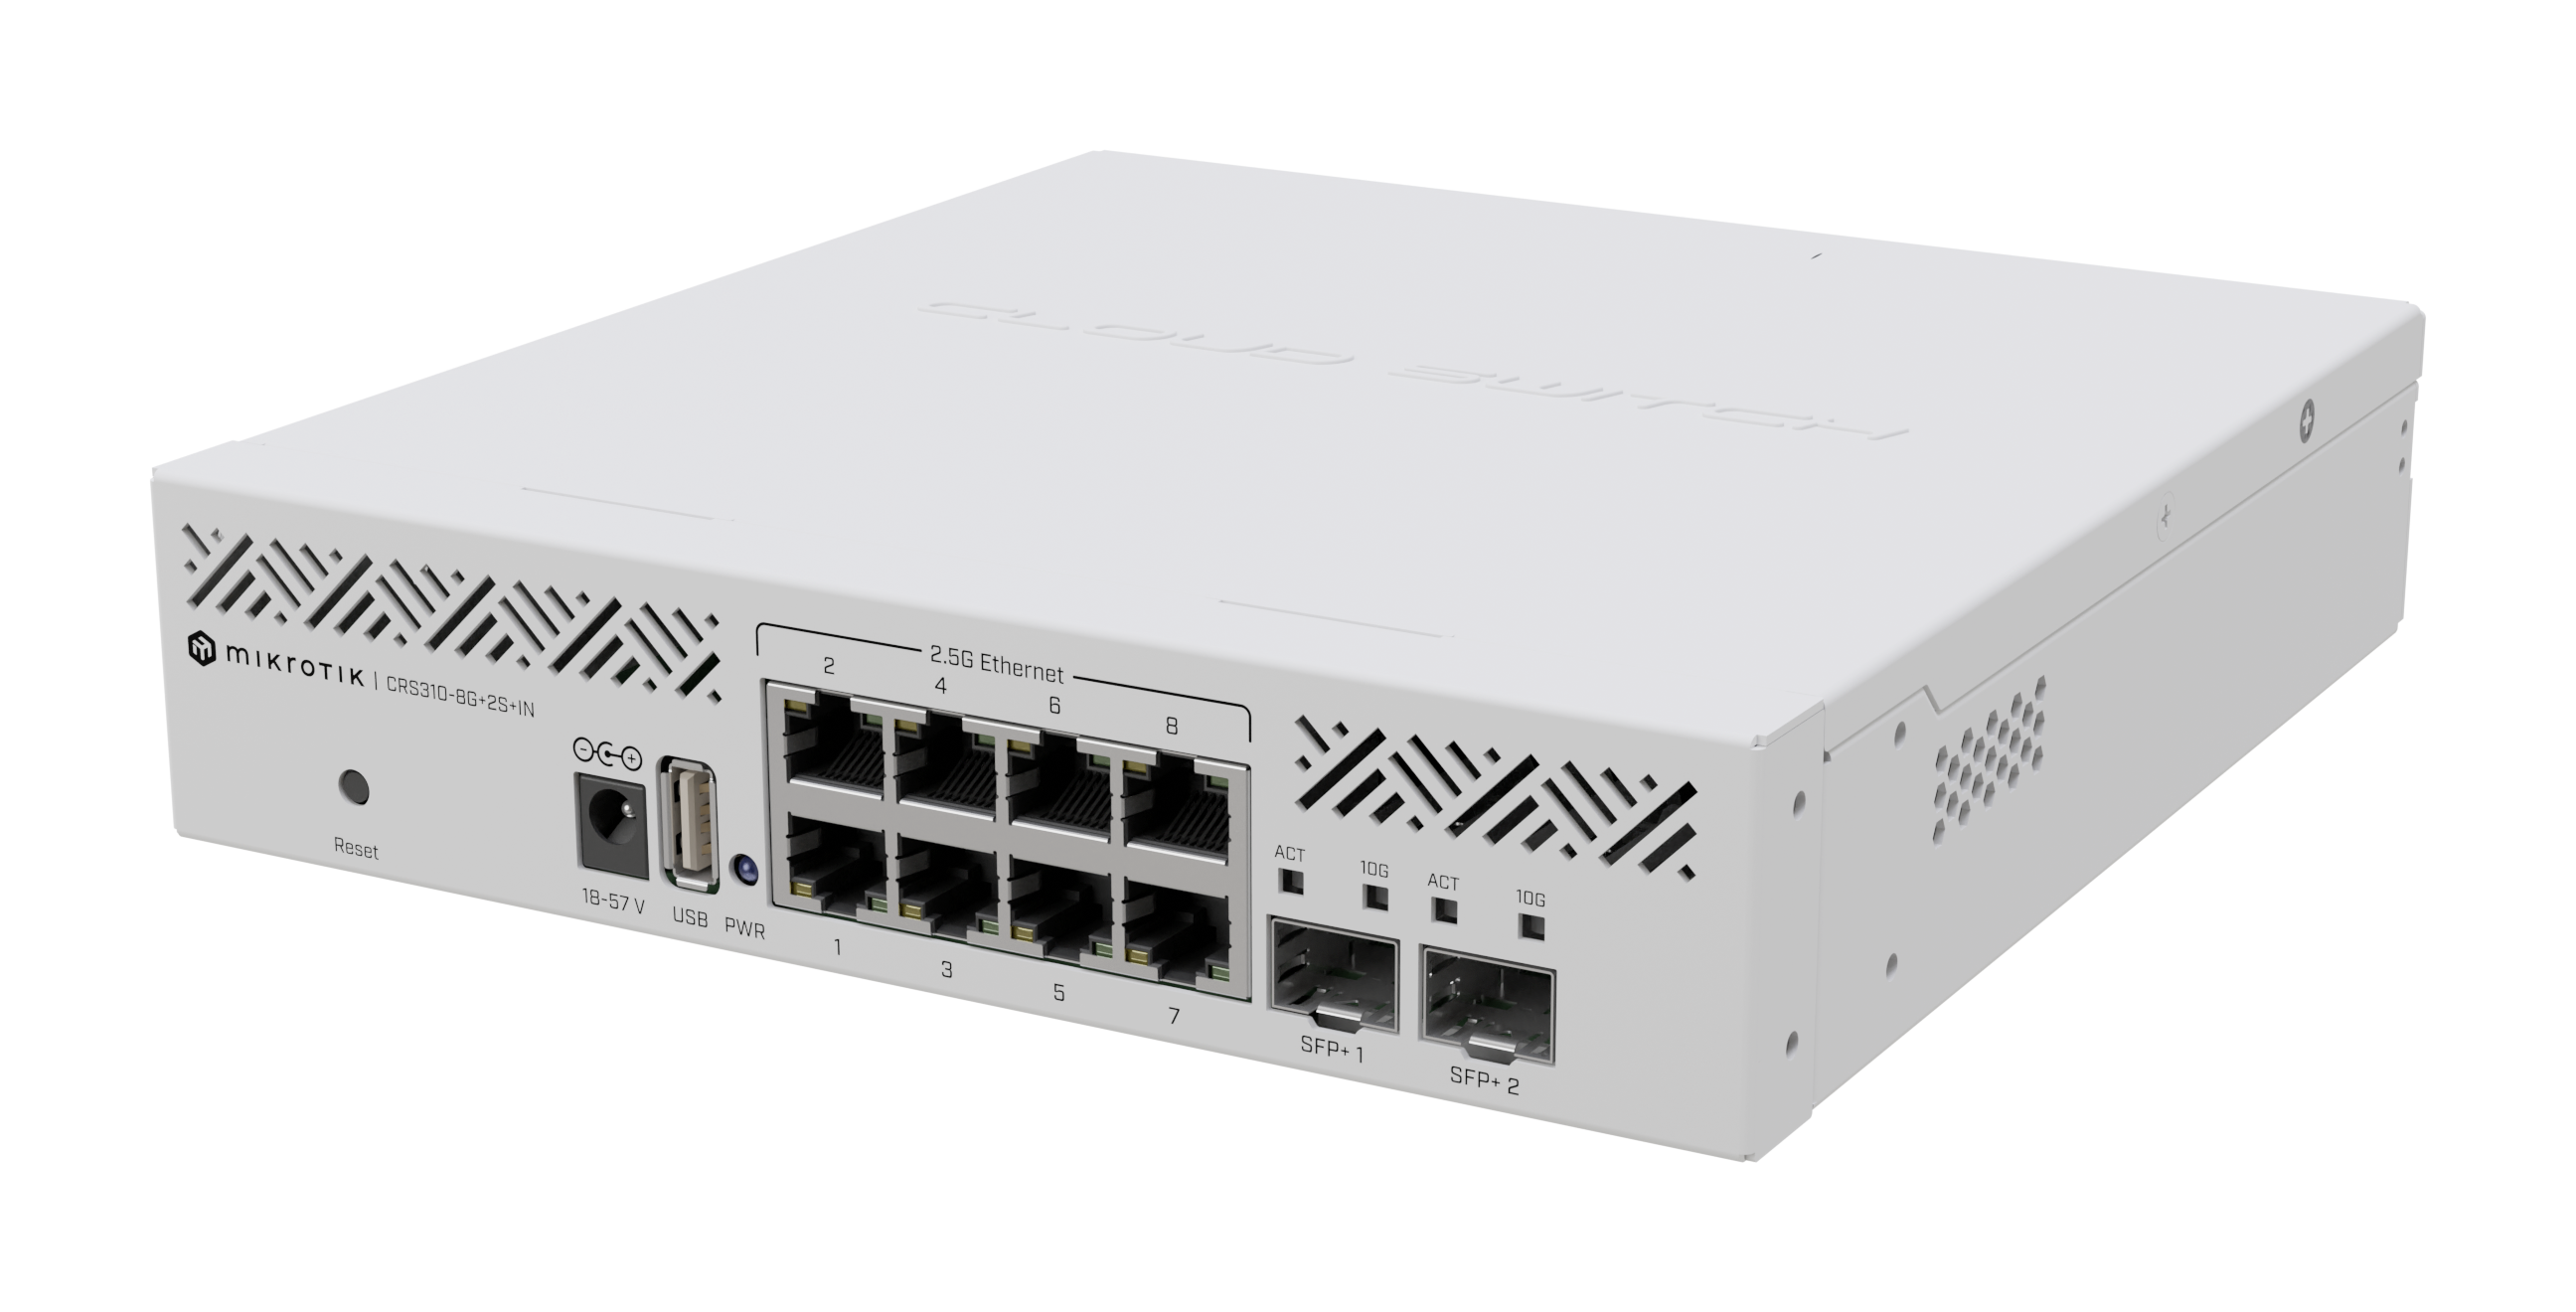 CRS310-8G+2S+IN, Router Switch CPU 800Mhz, RAM 256MB, 8x2.5GigaEth, 2xSFP+ 10Gbps, RouterOS L5 - CRS310-8G+2S+IN